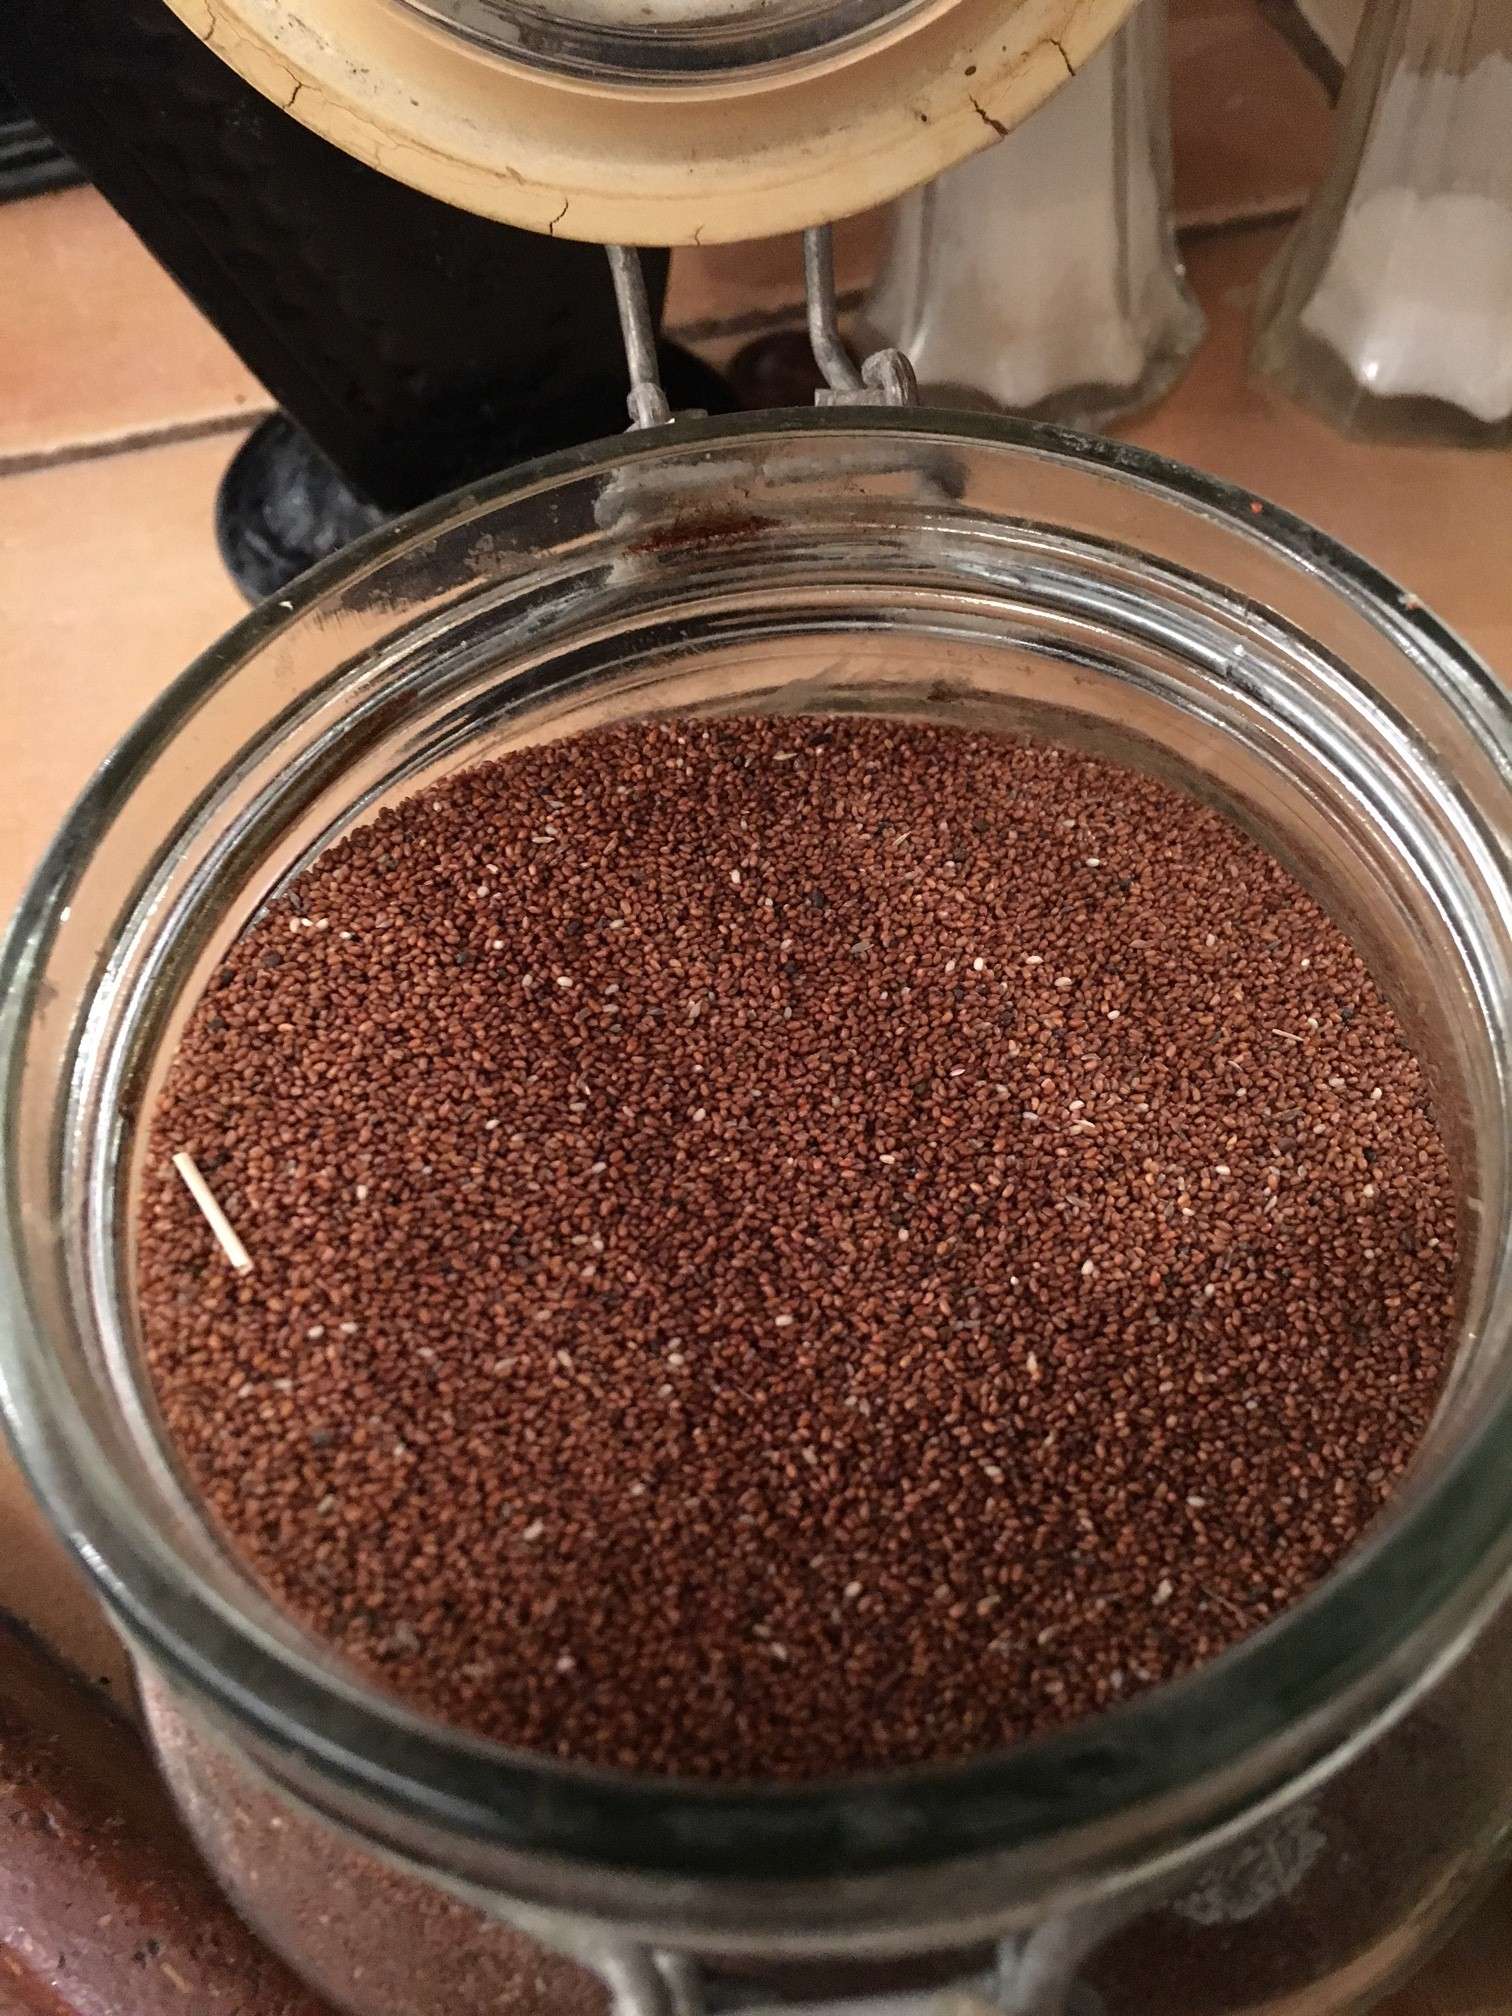 Teff grain from which injera is made